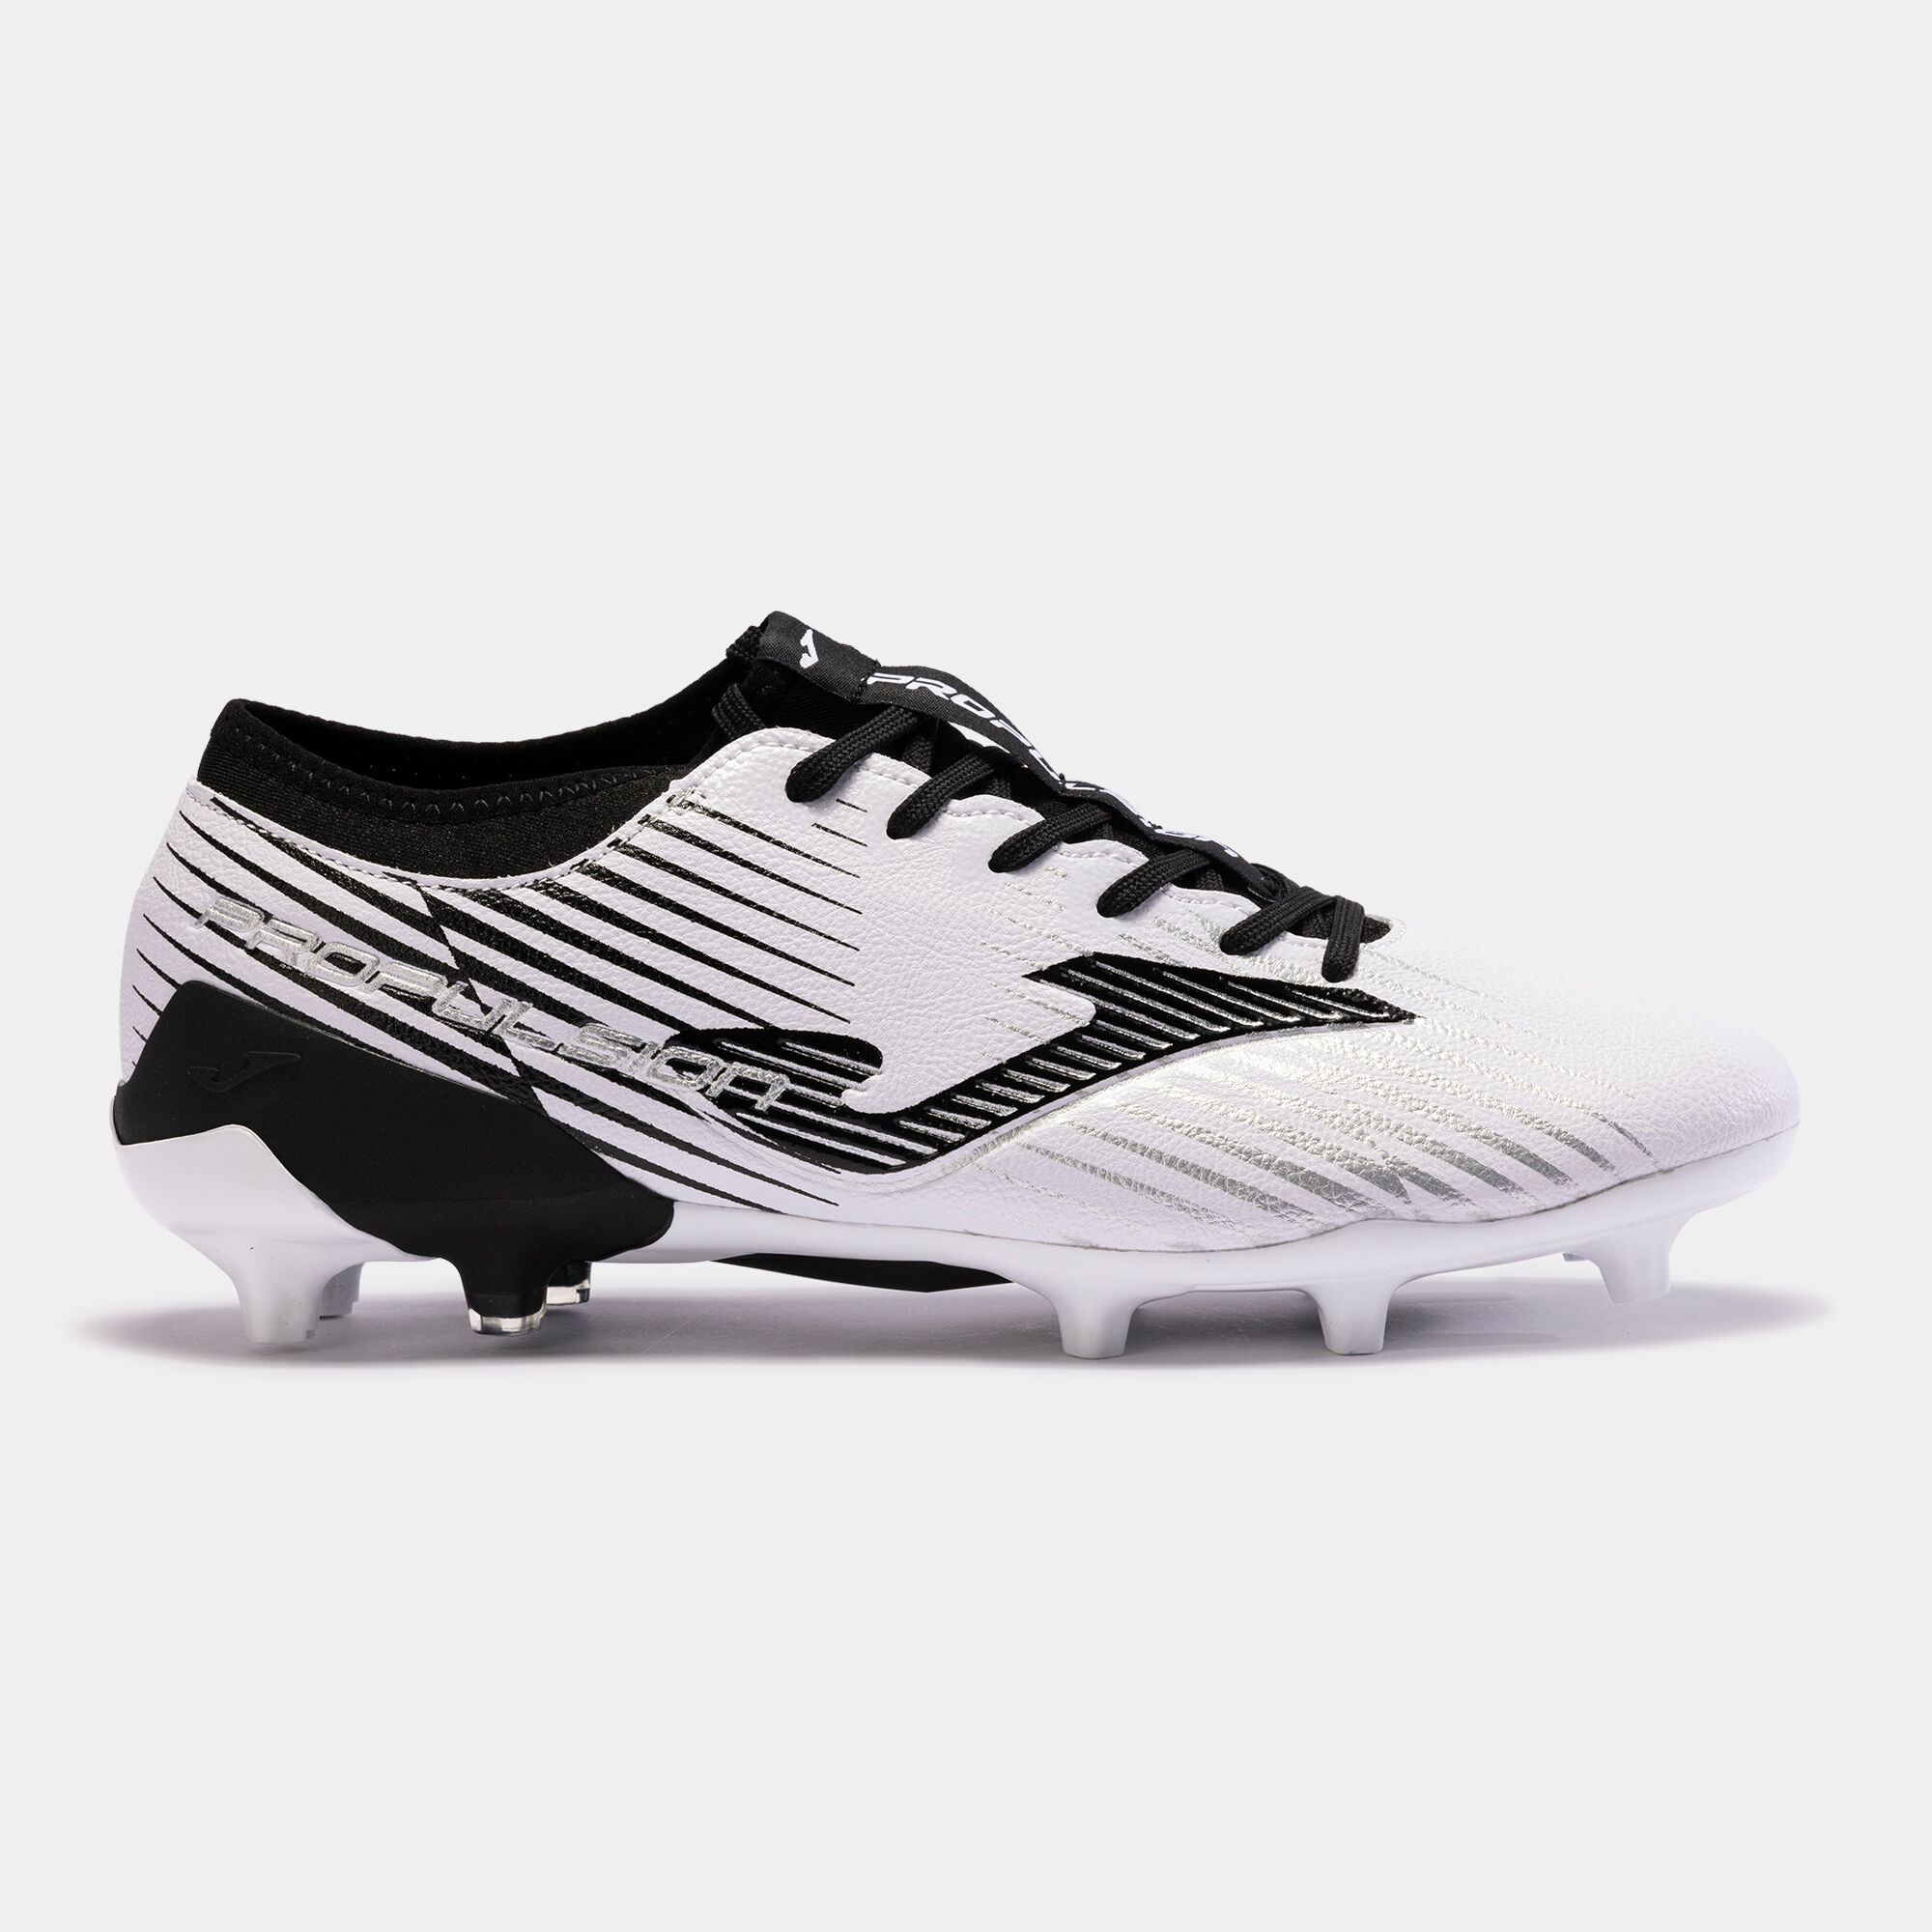 Football boots Propulsion Cup 23 firm ground FG white black